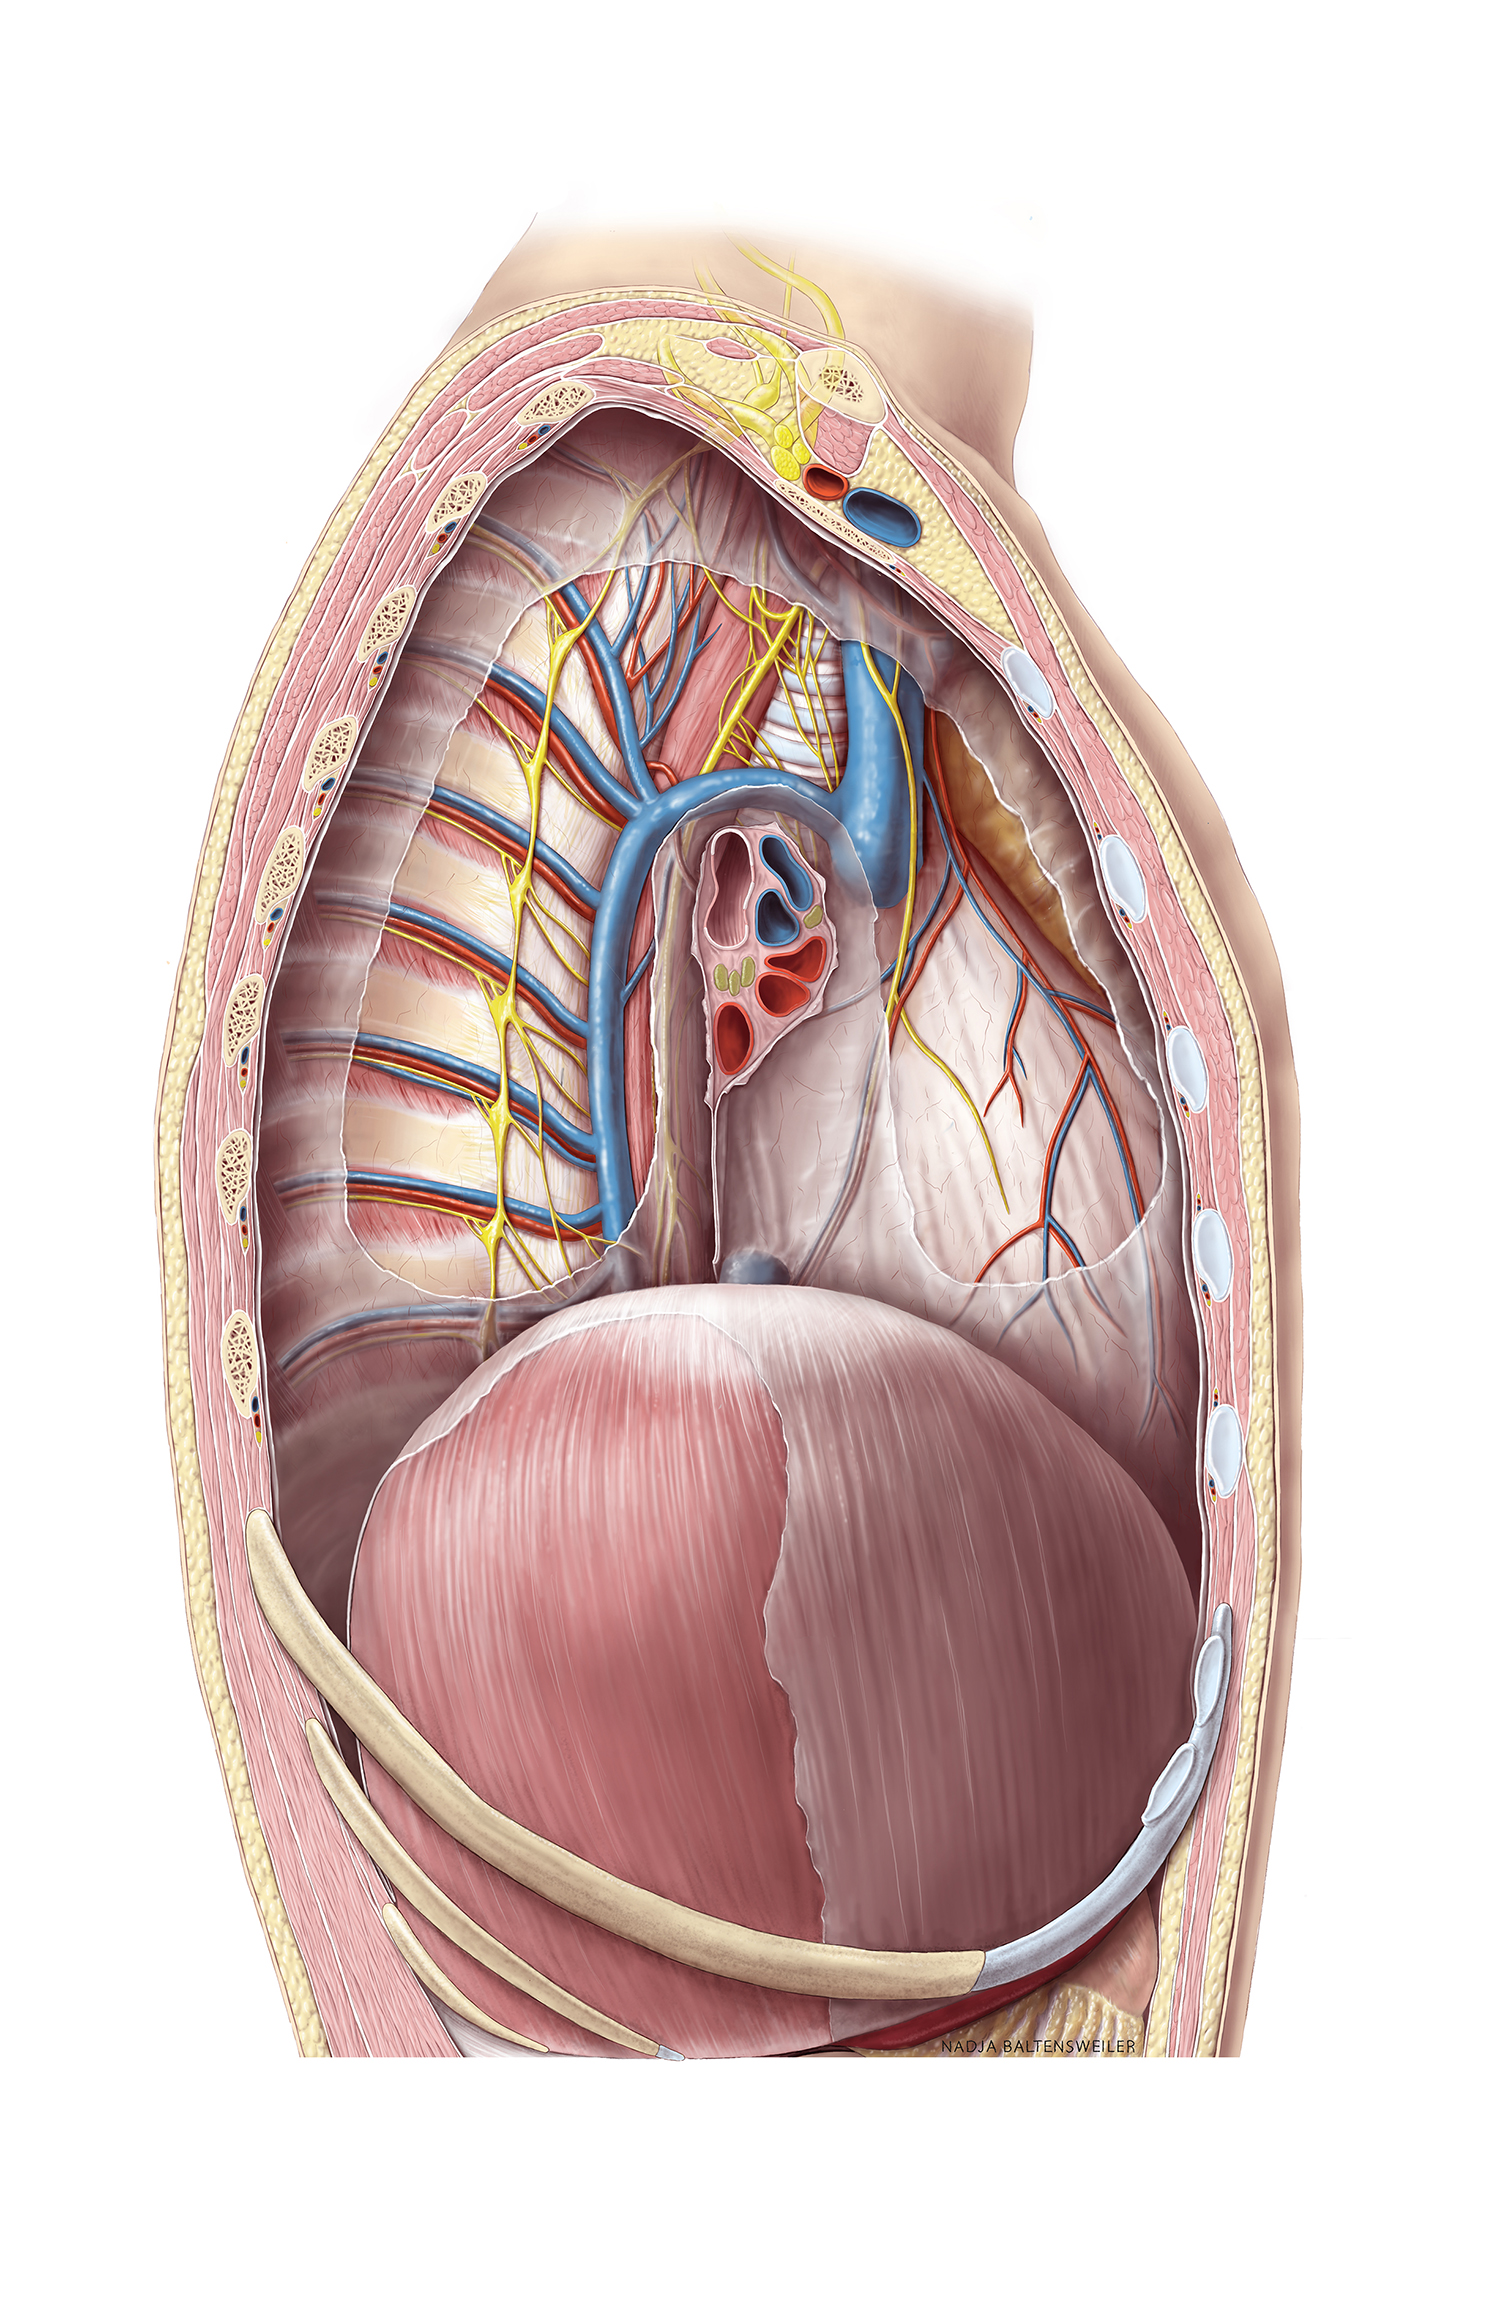 anatomical illustration of lateral view of opened thorax, lung removed